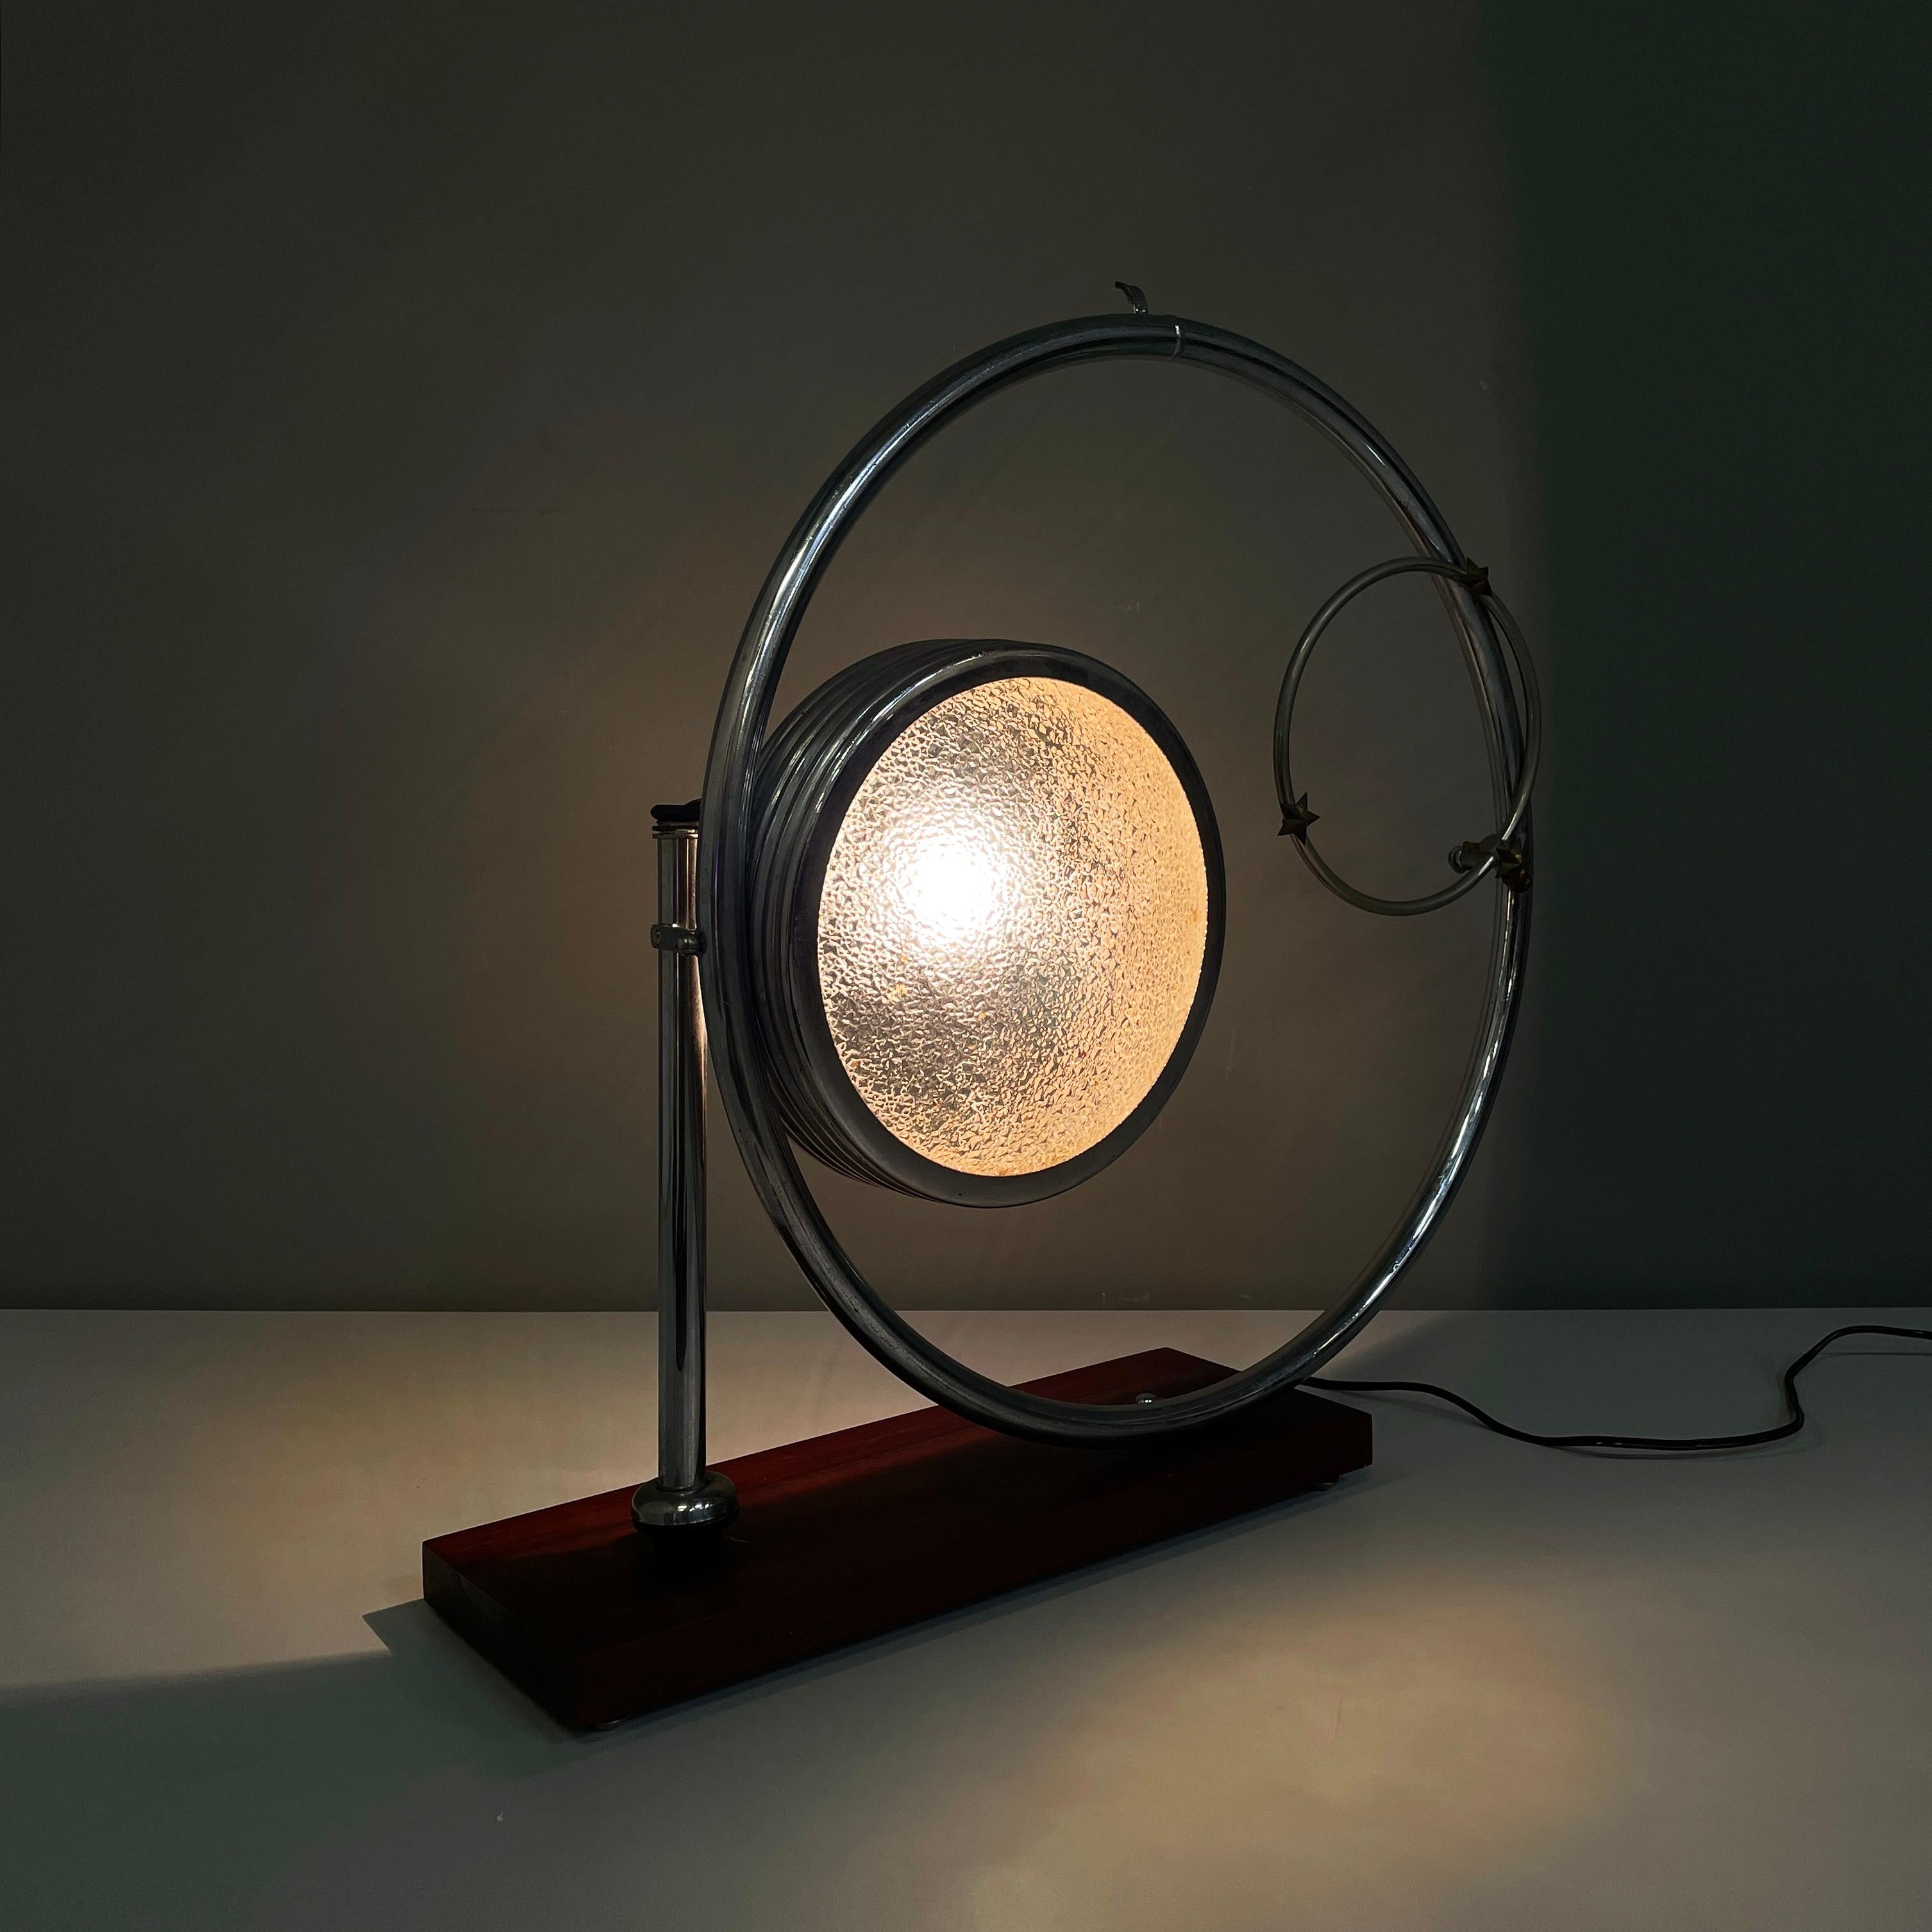 Italian modern Geometrical table lamp with crafted glass, metal and wood, 1980s
Geometrical table lamp with rectangular base in dark wood. The round diffuser is made of finely worked glass with thick metal profiles. The structure that supports the